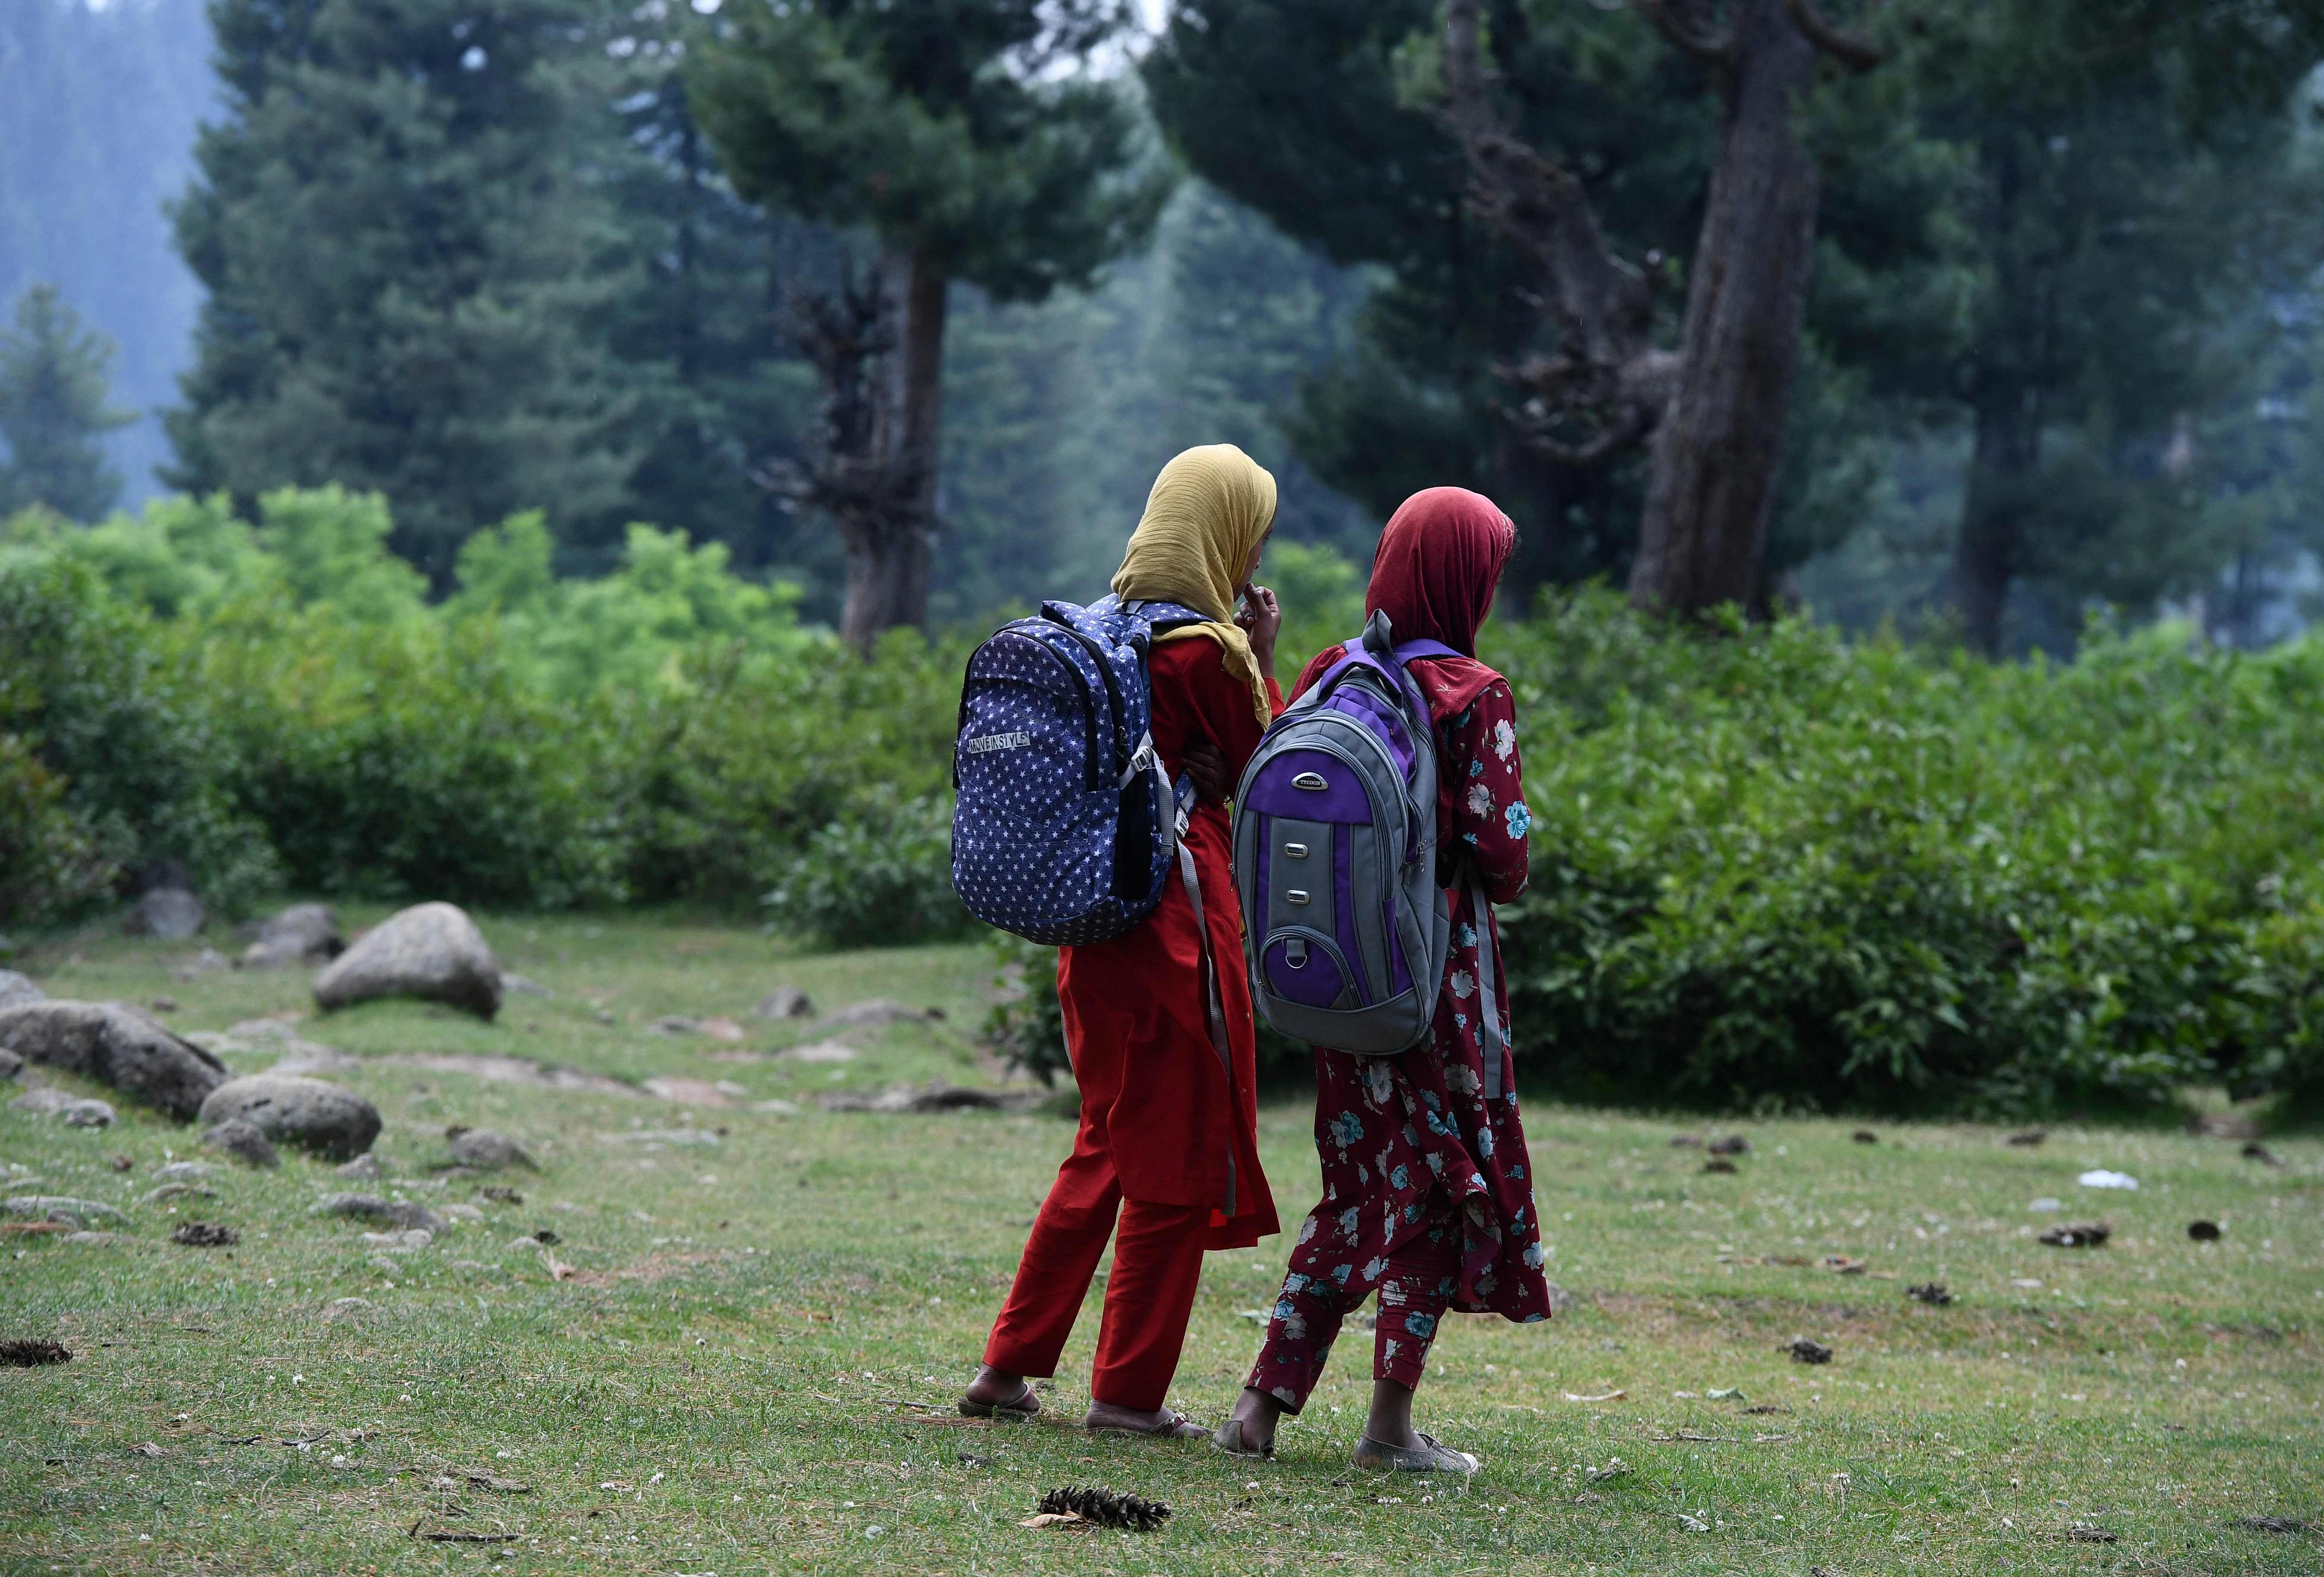 School children walk back home after attending an open-air school situated on top of a mountain in J&K. Credit: AFP Photo